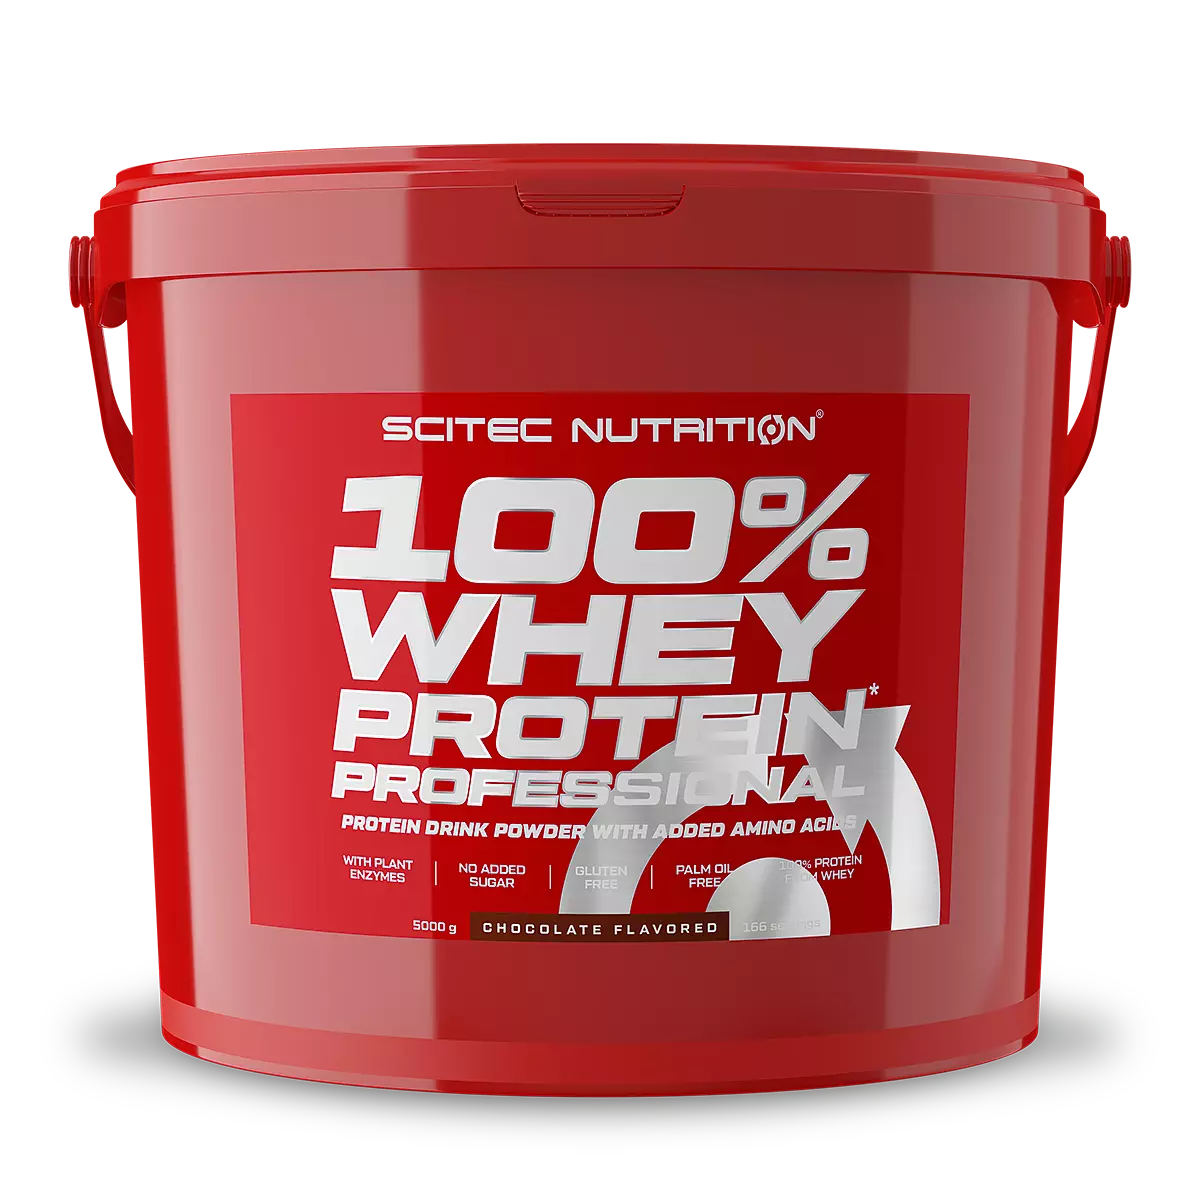 SCITEC NUTRITION 100% Whey Protein Professional (5 kg)